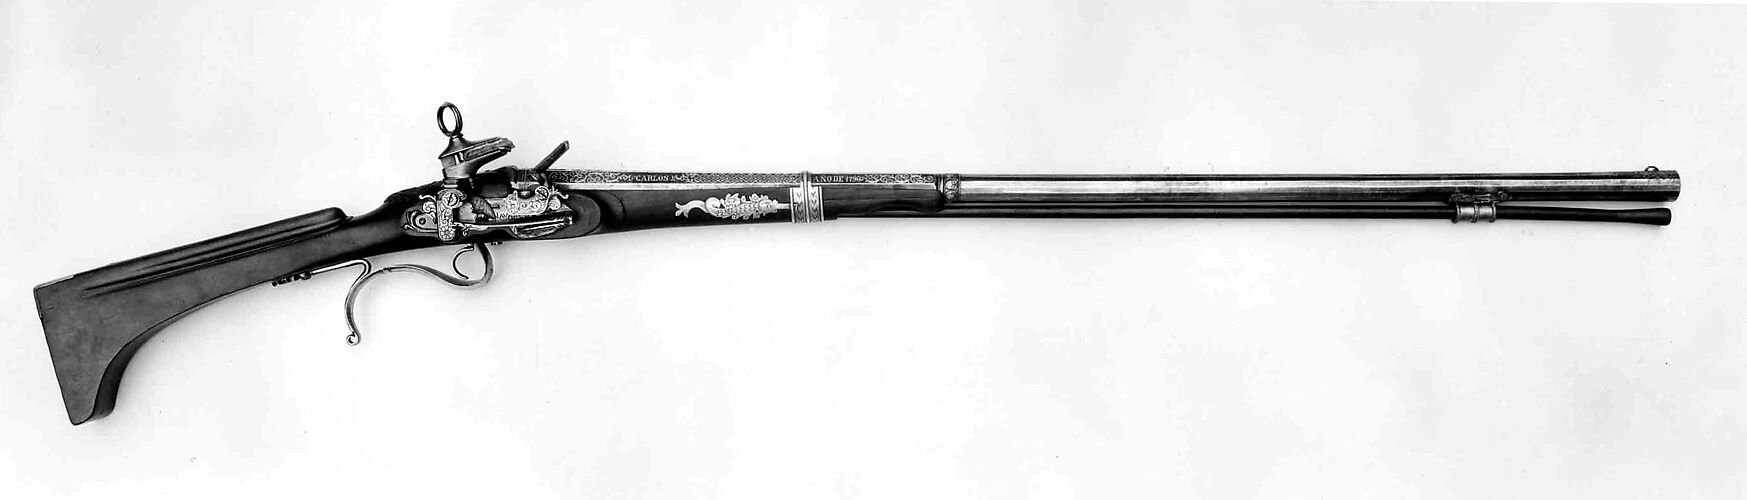 Miquelet Gun Made for Charles IV of Spain (reigned 1788–1808)